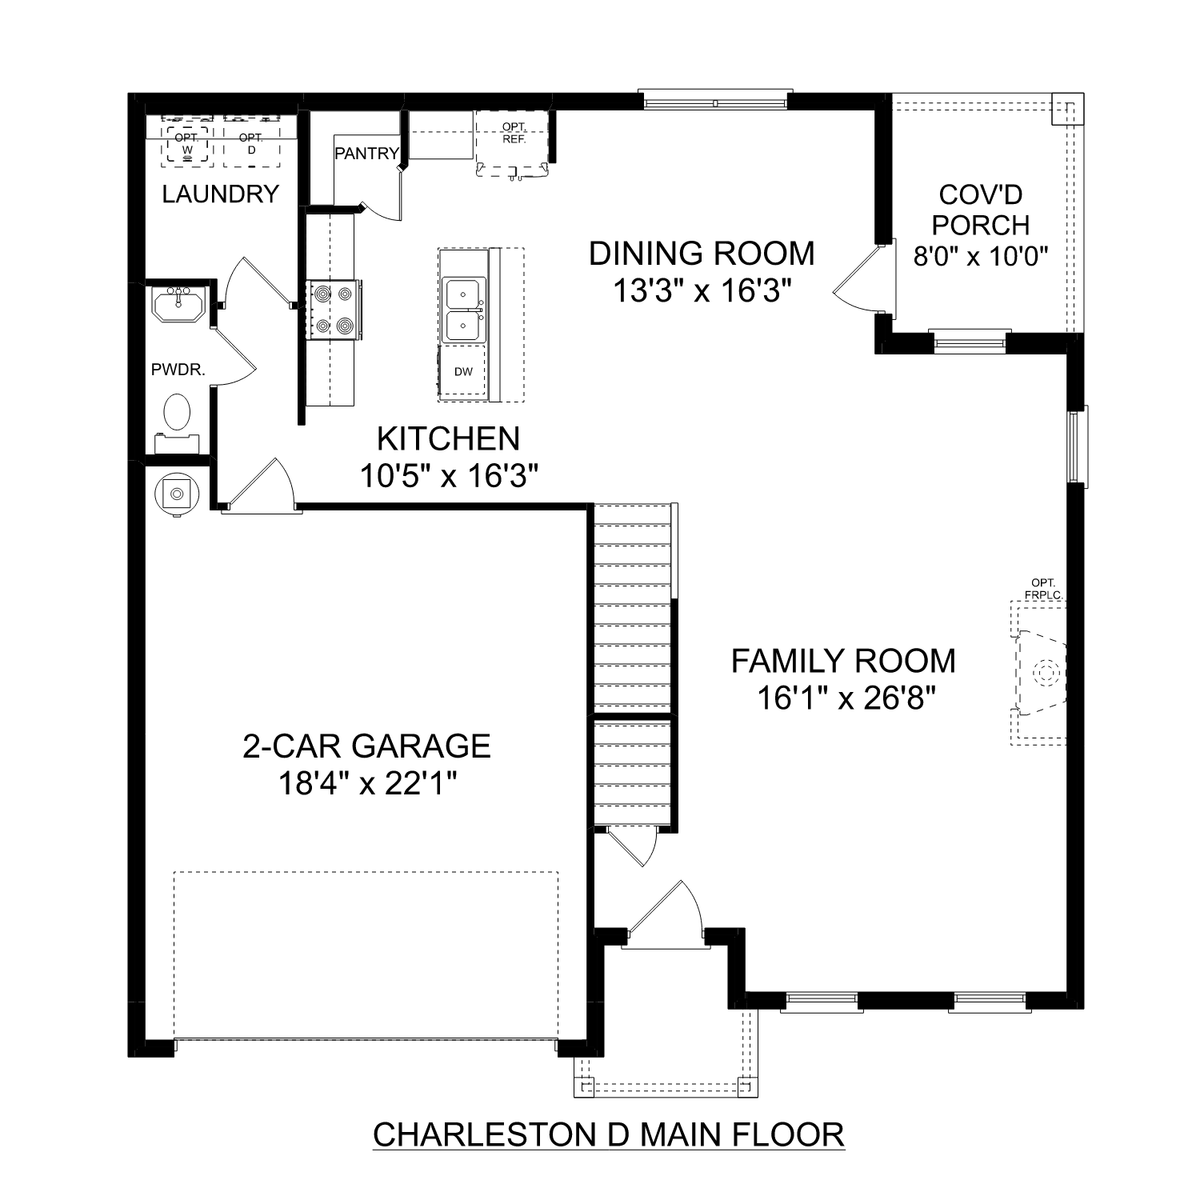 1 - The Charleston D buildable floor plan layout in Davidson Homes' Durham Farms community.